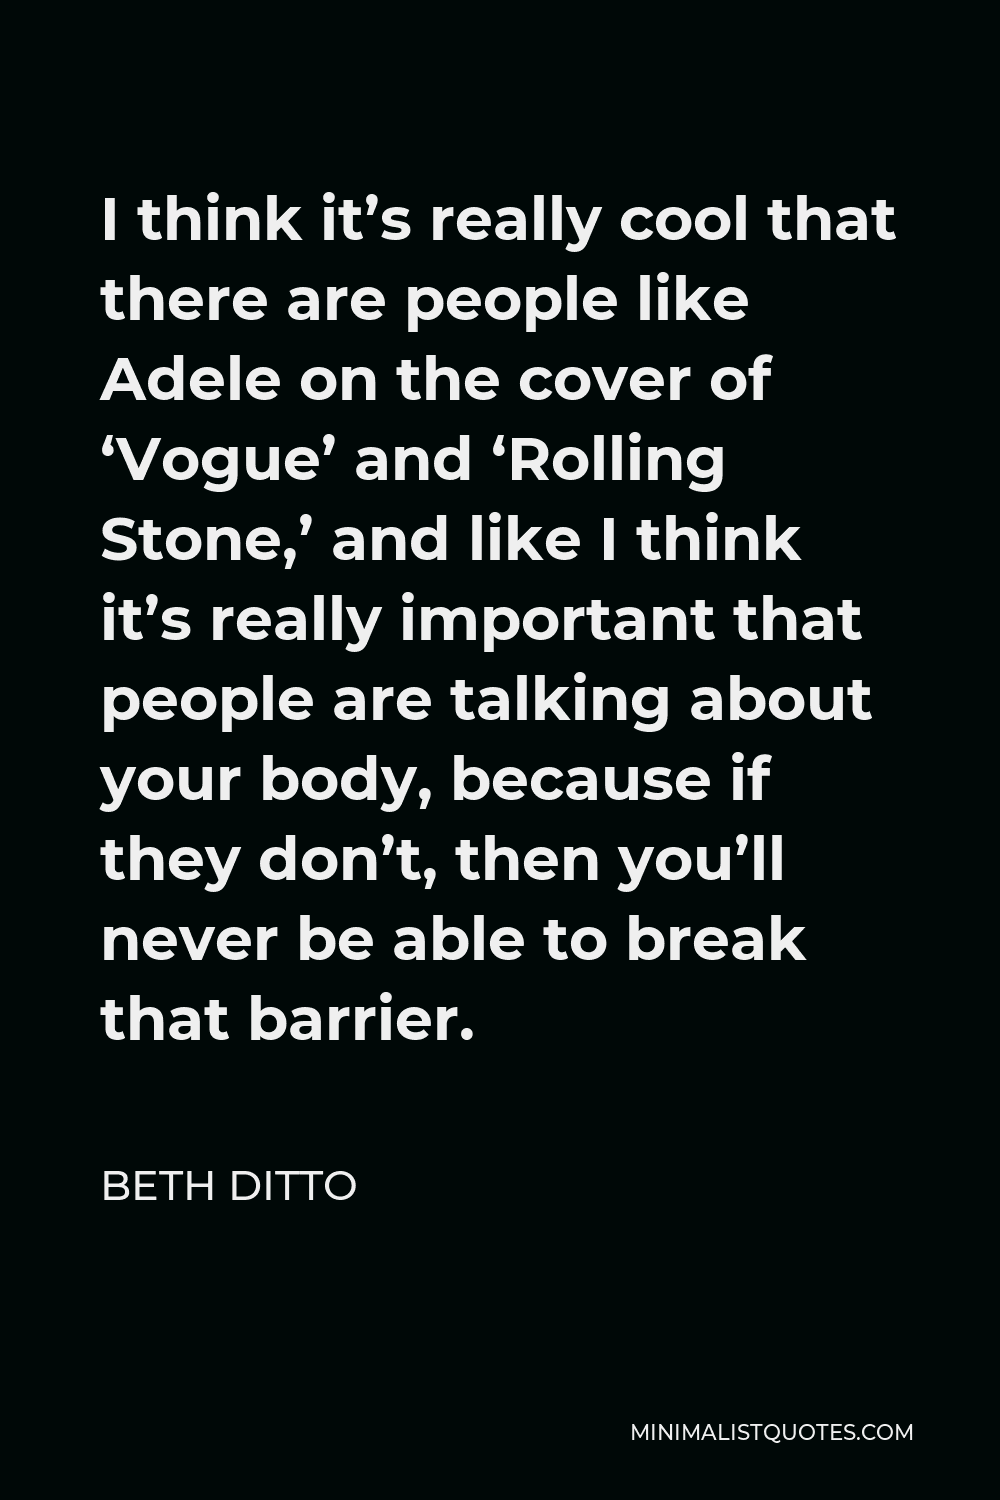 Beth Ditto Quote - I think it’s really cool that there are people like Adele on the cover of ‘Vogue’ and ‘Rolling Stone,’ and like I think it’s really important that people are talking about your body, because if they don’t, then you’ll never be able to break that barrier.